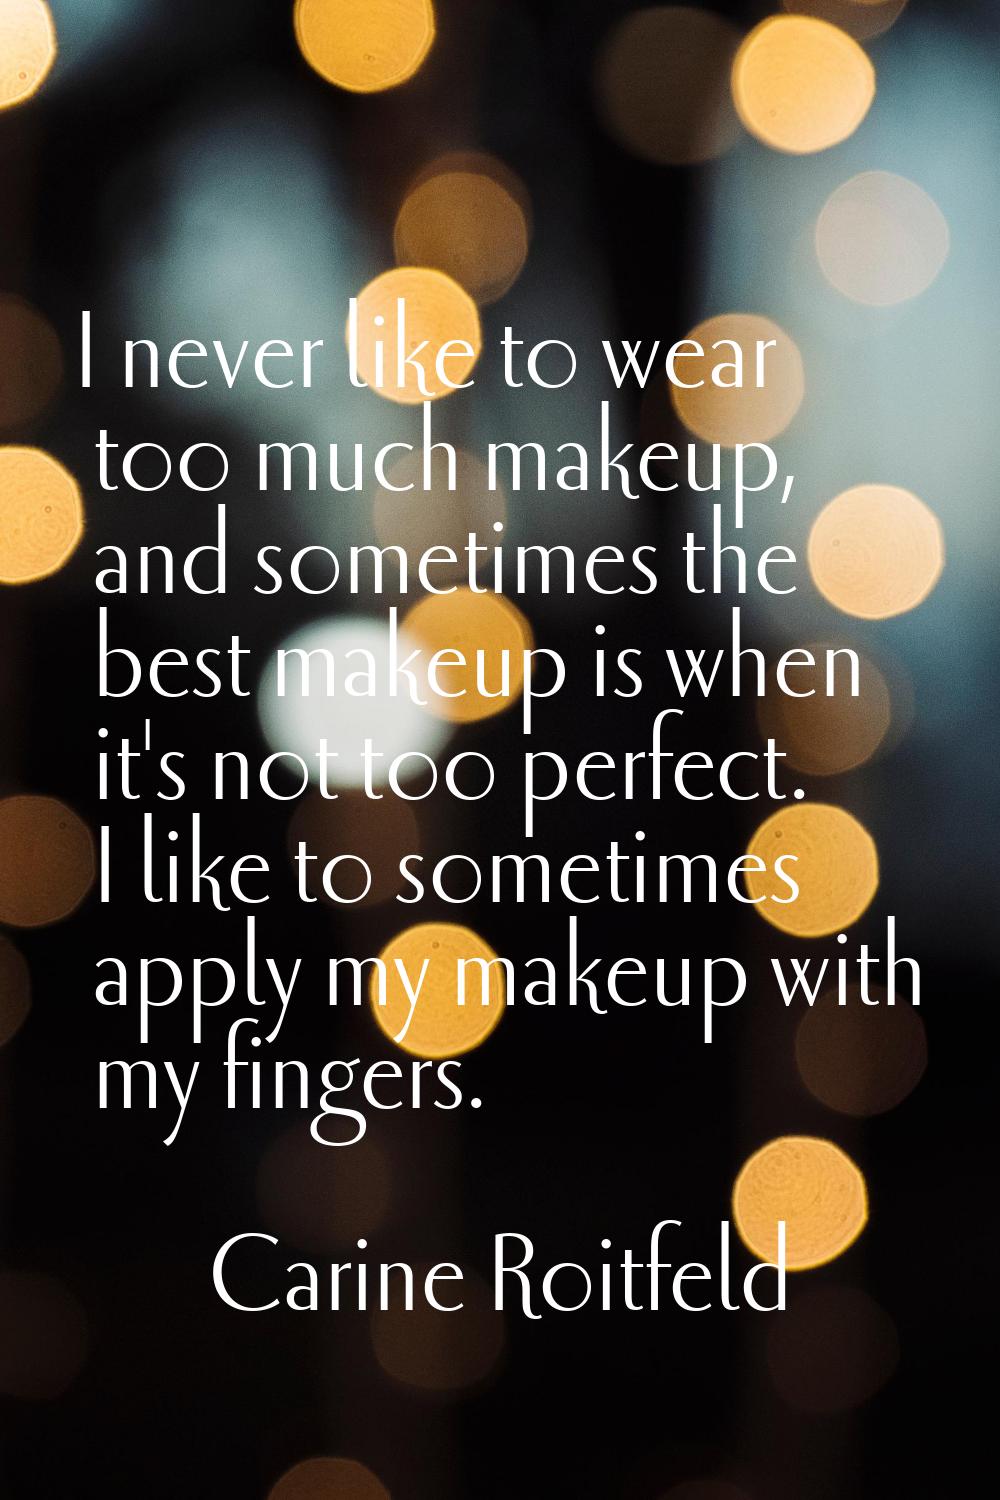 I never like to wear too much makeup, and sometimes the best makeup is when it's not too perfect. I